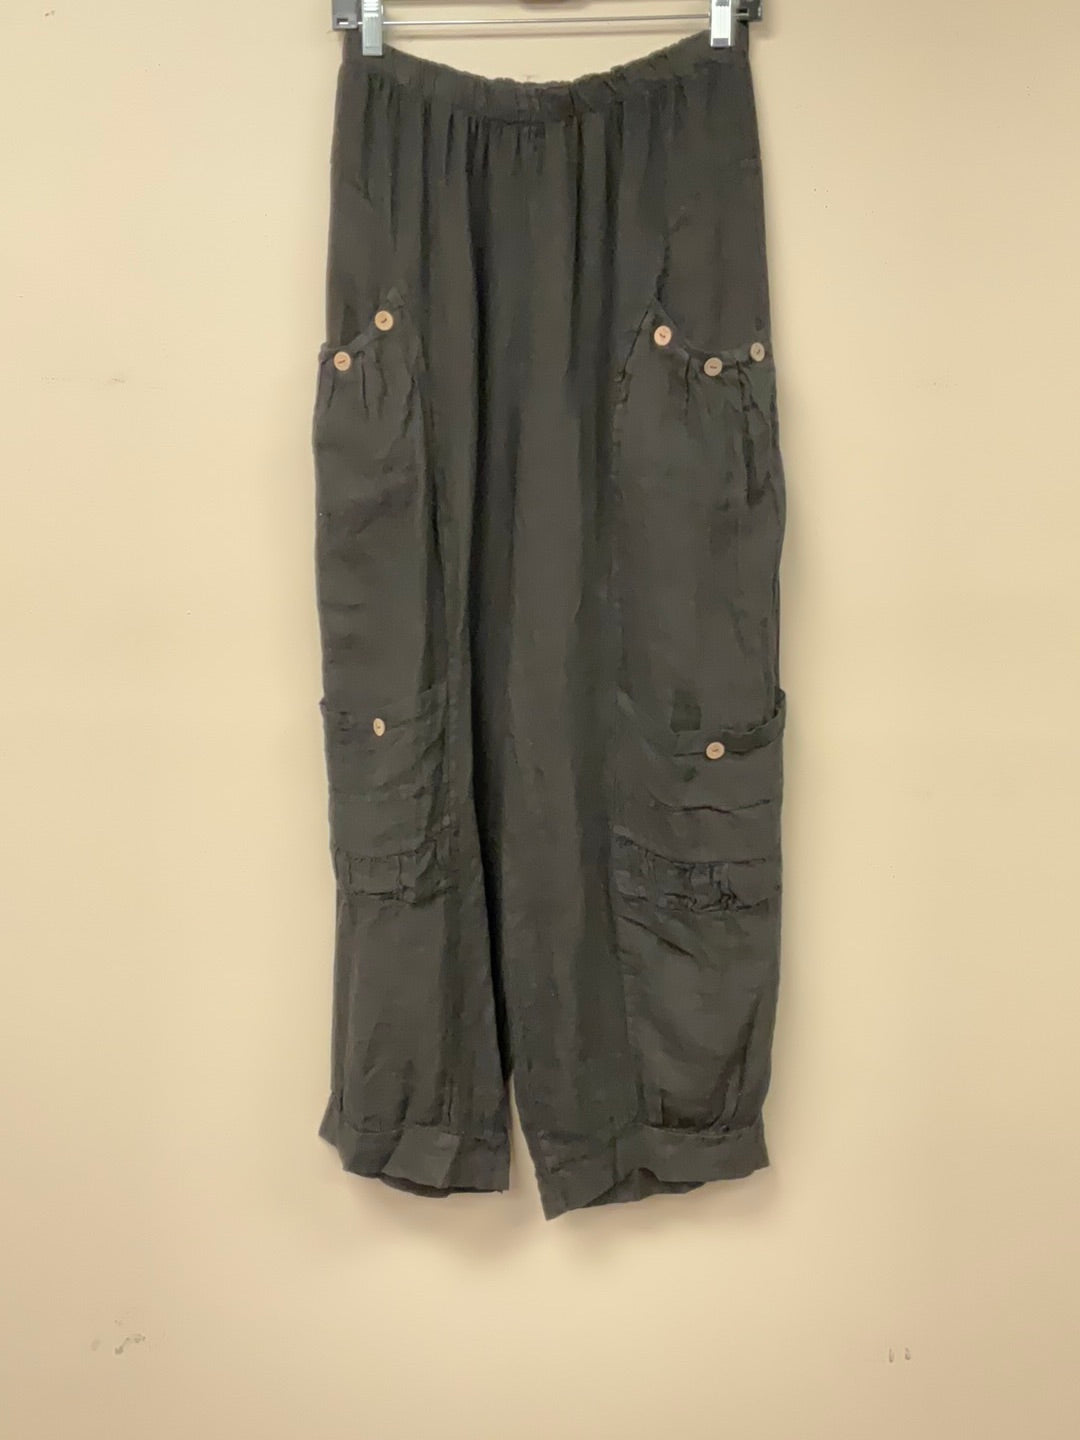 Four pocket Italian linen pants with button accent.